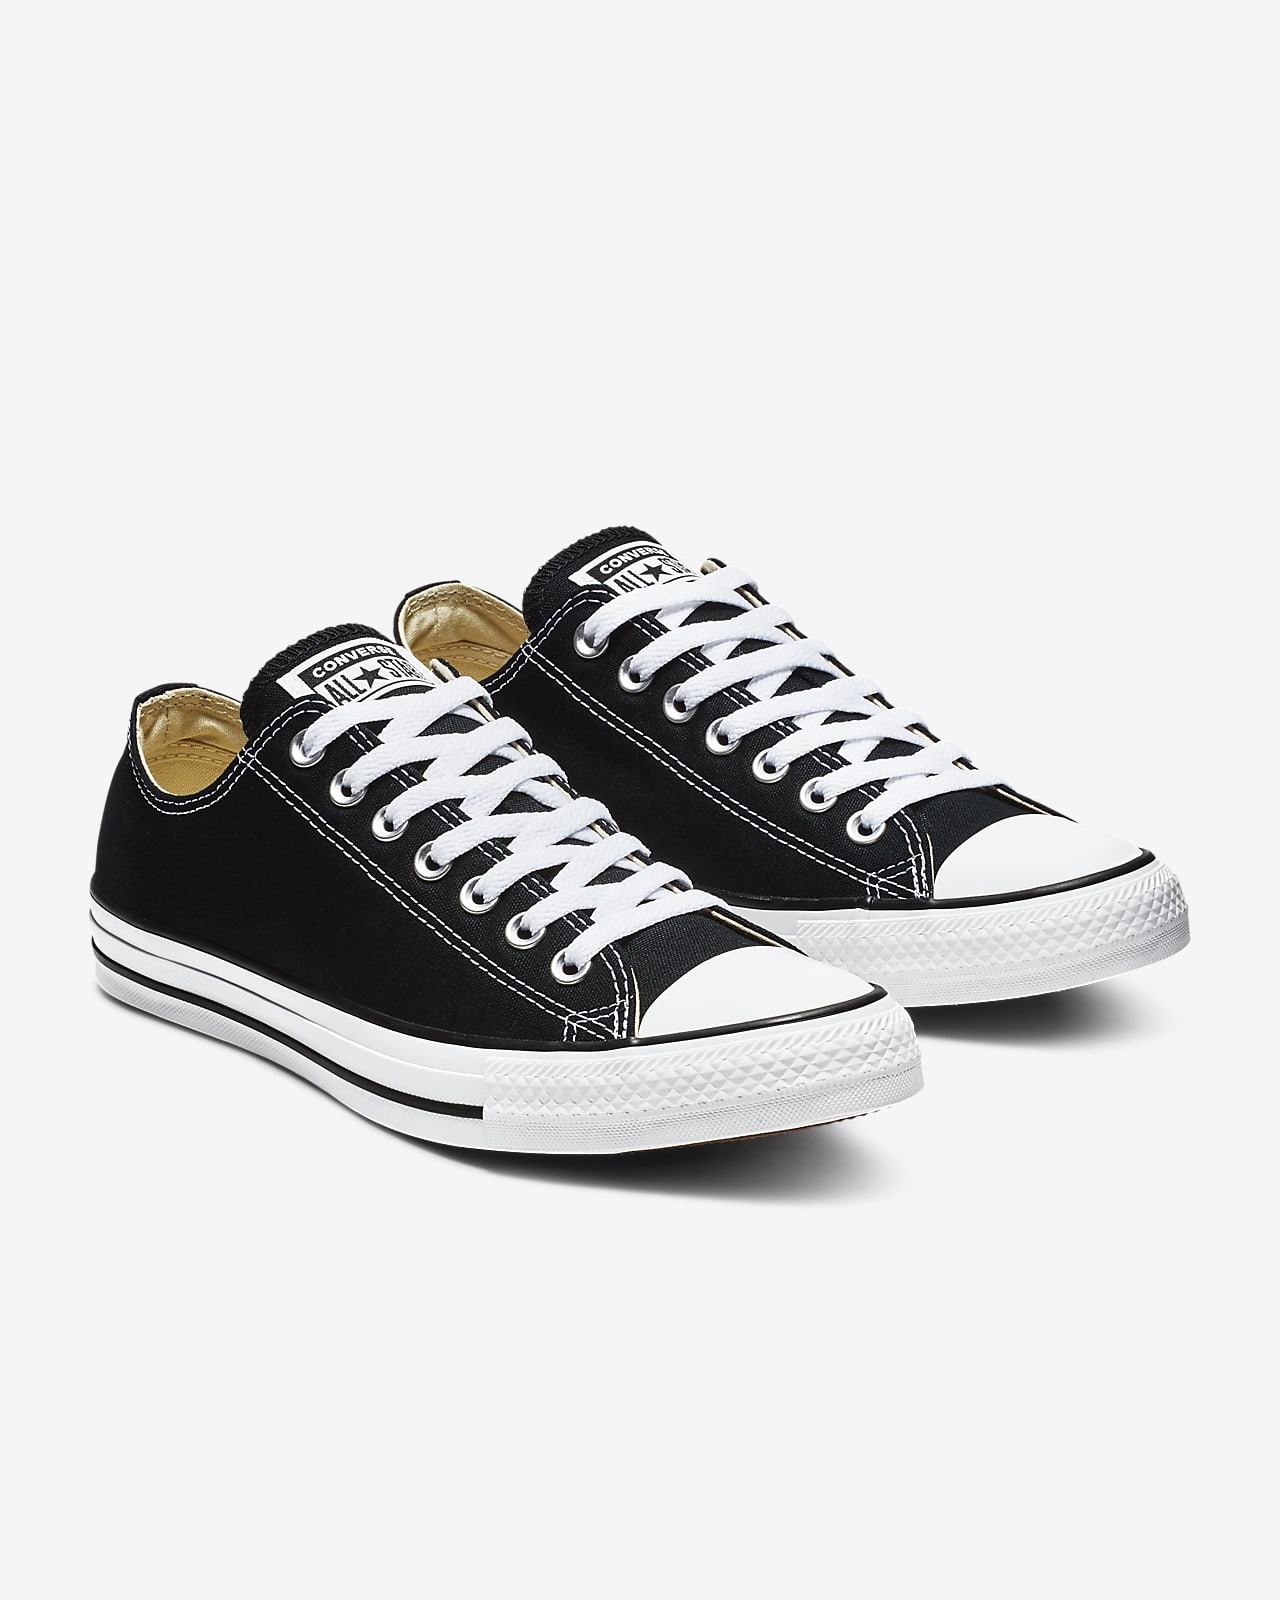 Converse Chuck Taylor All Star Low Top Shoes جو فريزر